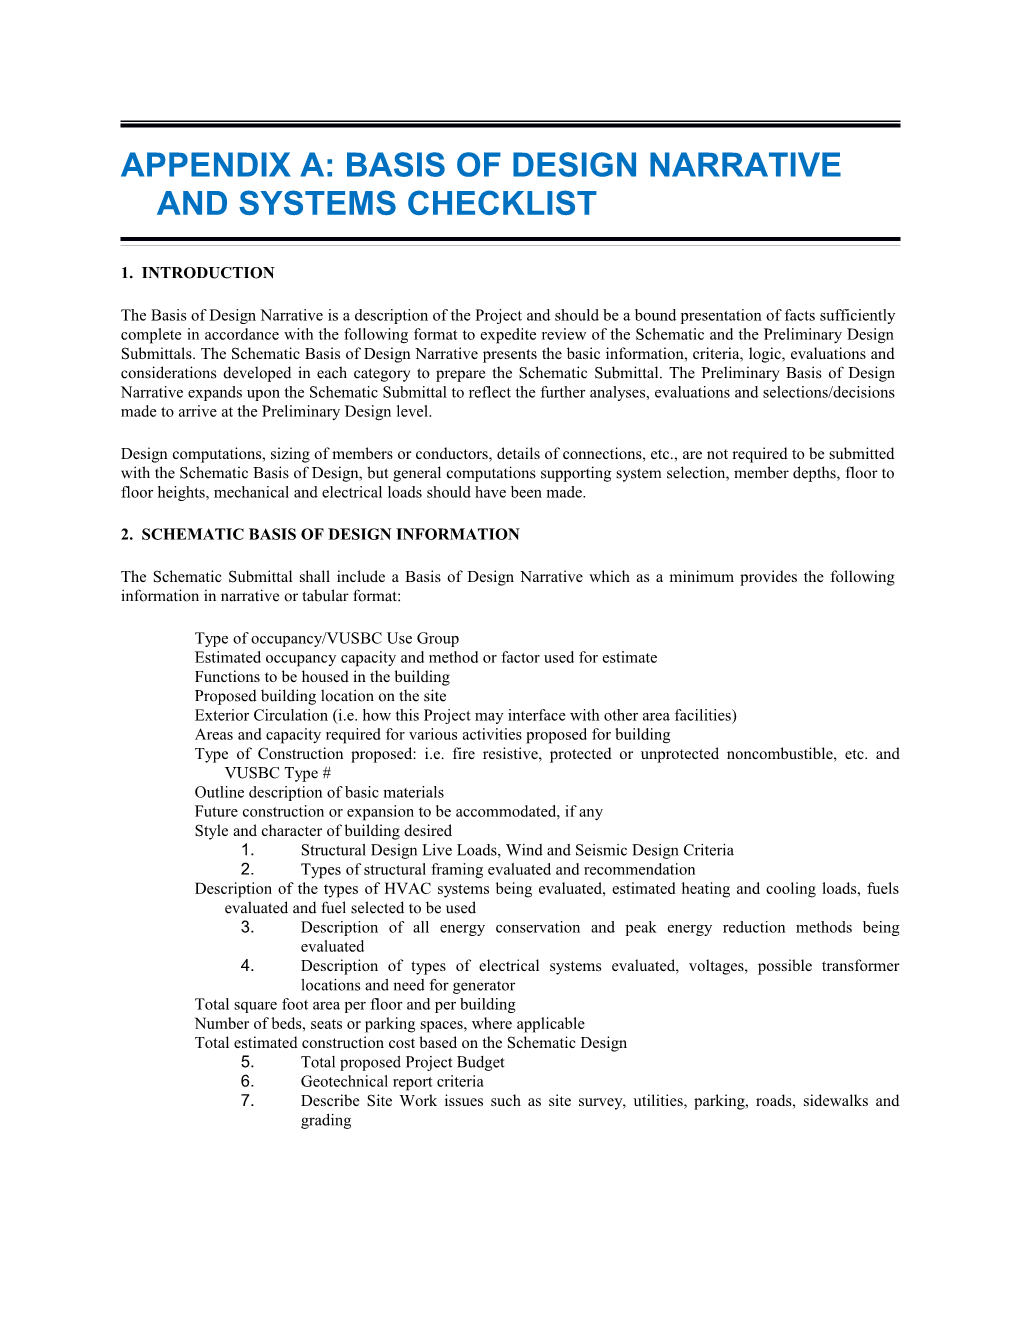 Appendix A: Basis of Design Narrative and Systems Checklist